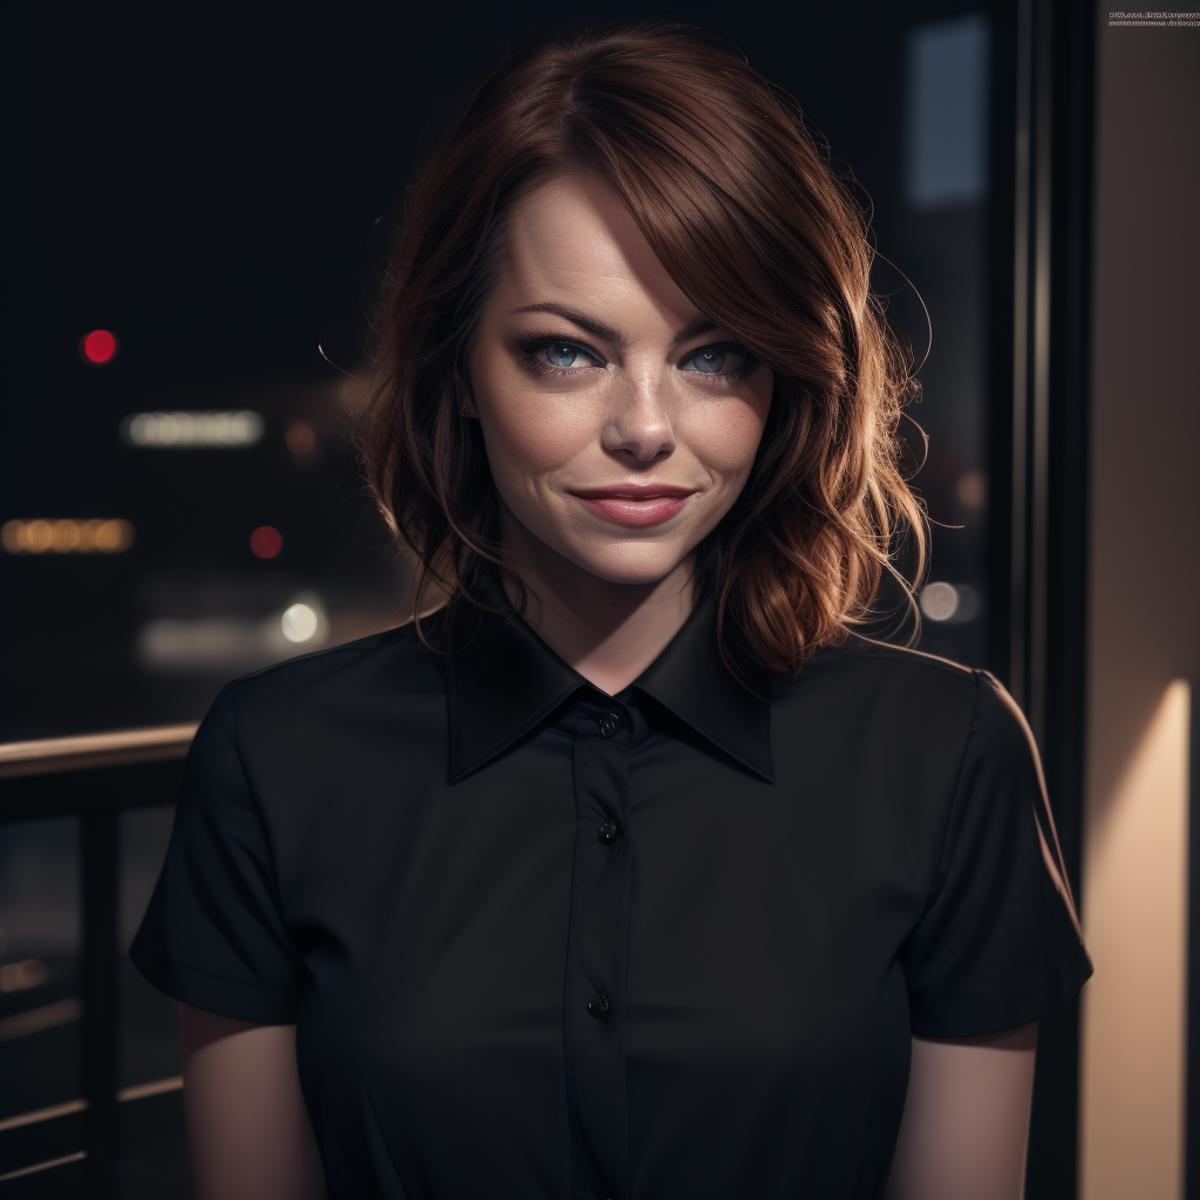 Emma Stone image by infamous__fish